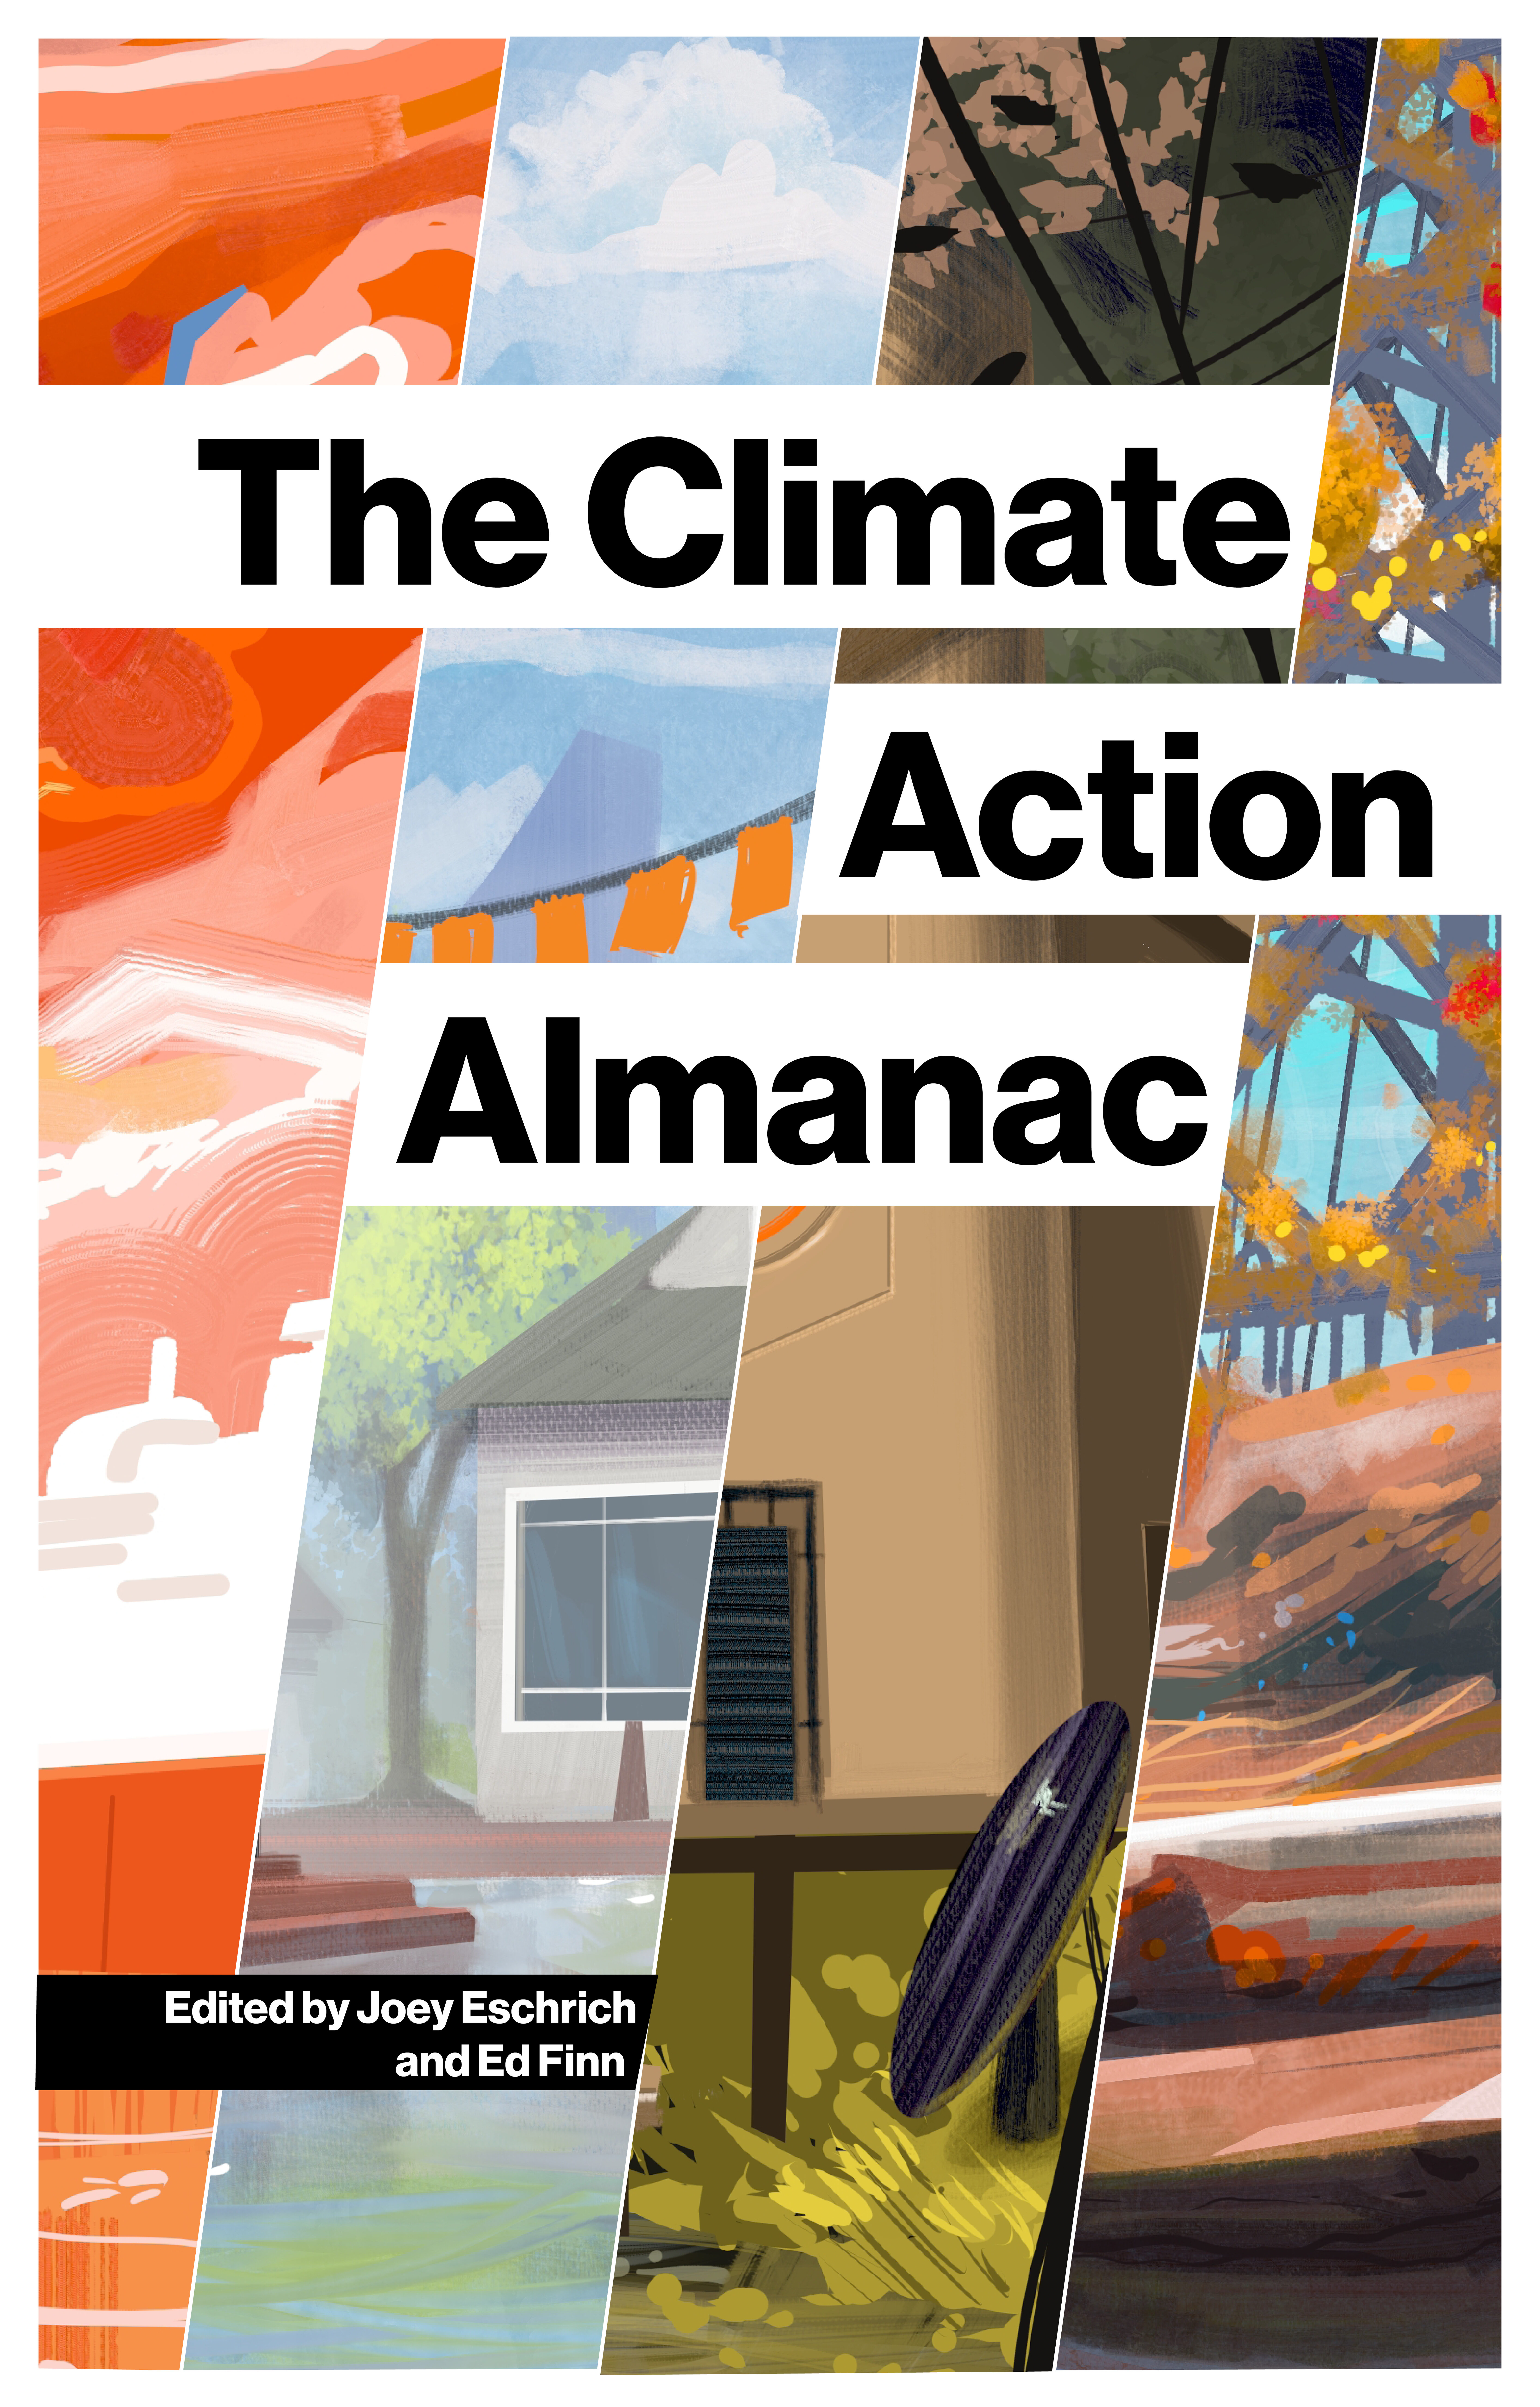 A book cover for The Climate Action Almanac, featuring the book's title and a series of colorful slices from illustrations of different landscapes, which depict environmental futures on the water, in the desert, and in wetlands.